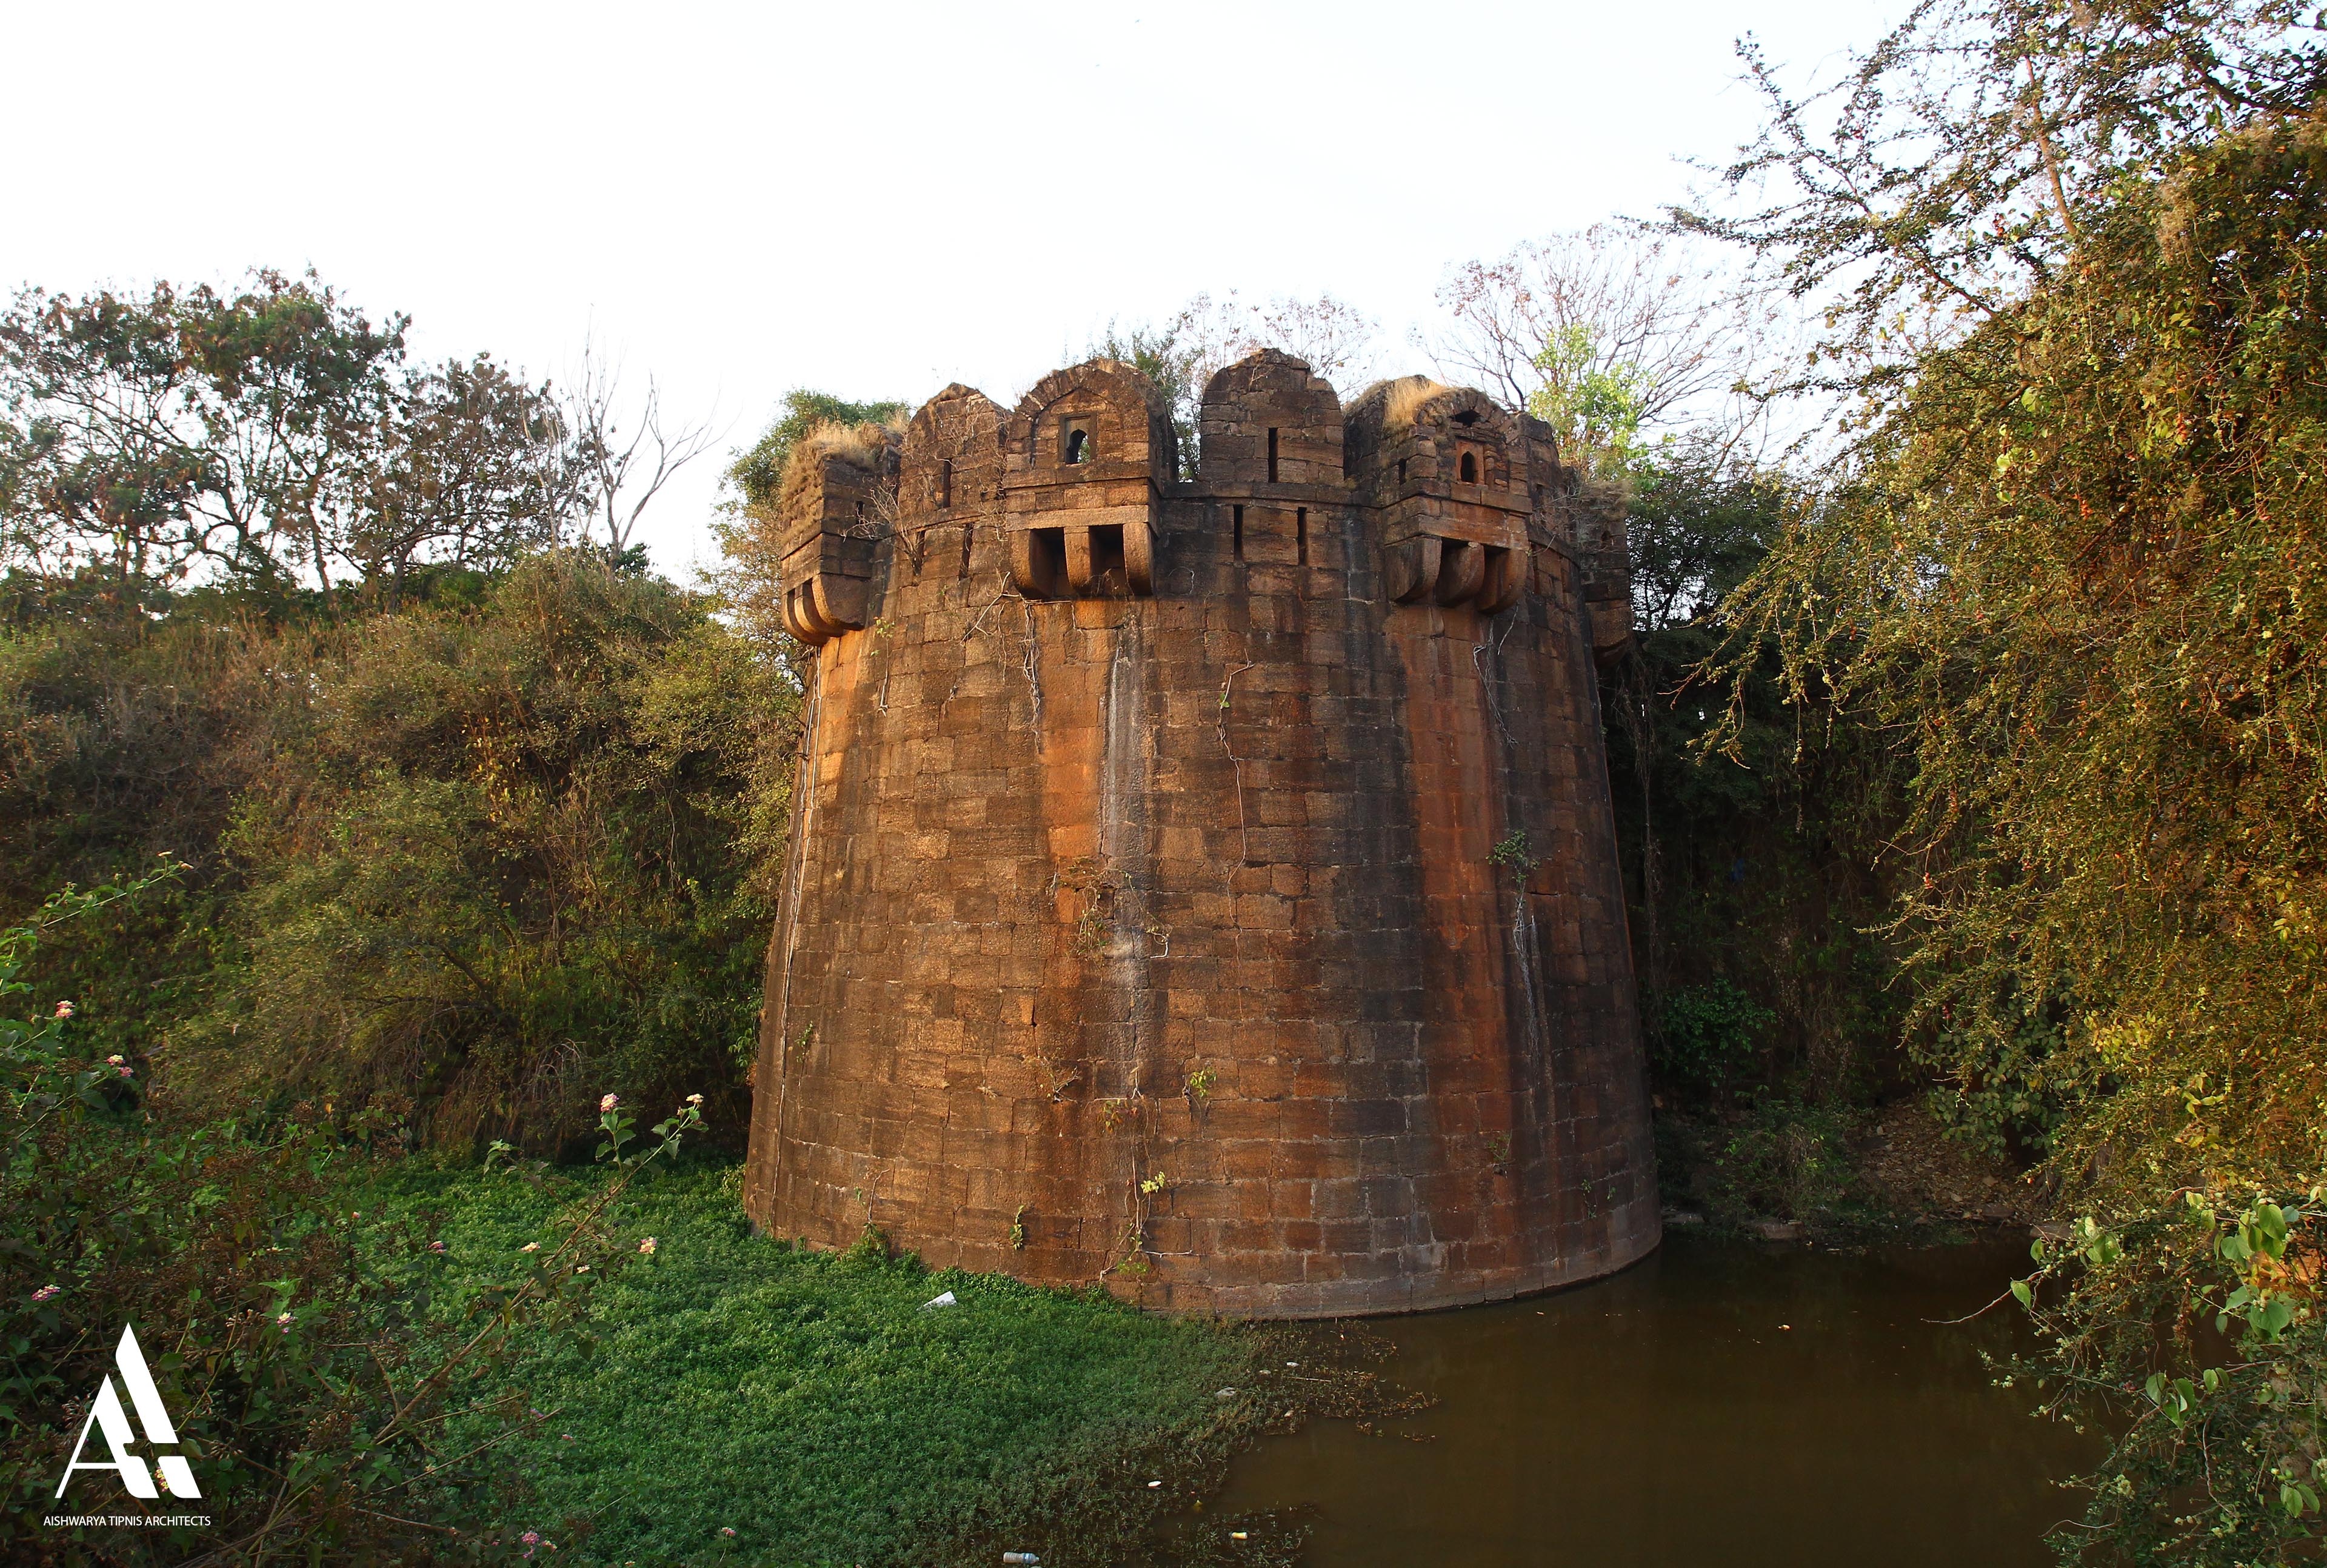 Restoration of the Fort Wall and Development of the Moat Area as part of the Belagavi Smart City Project